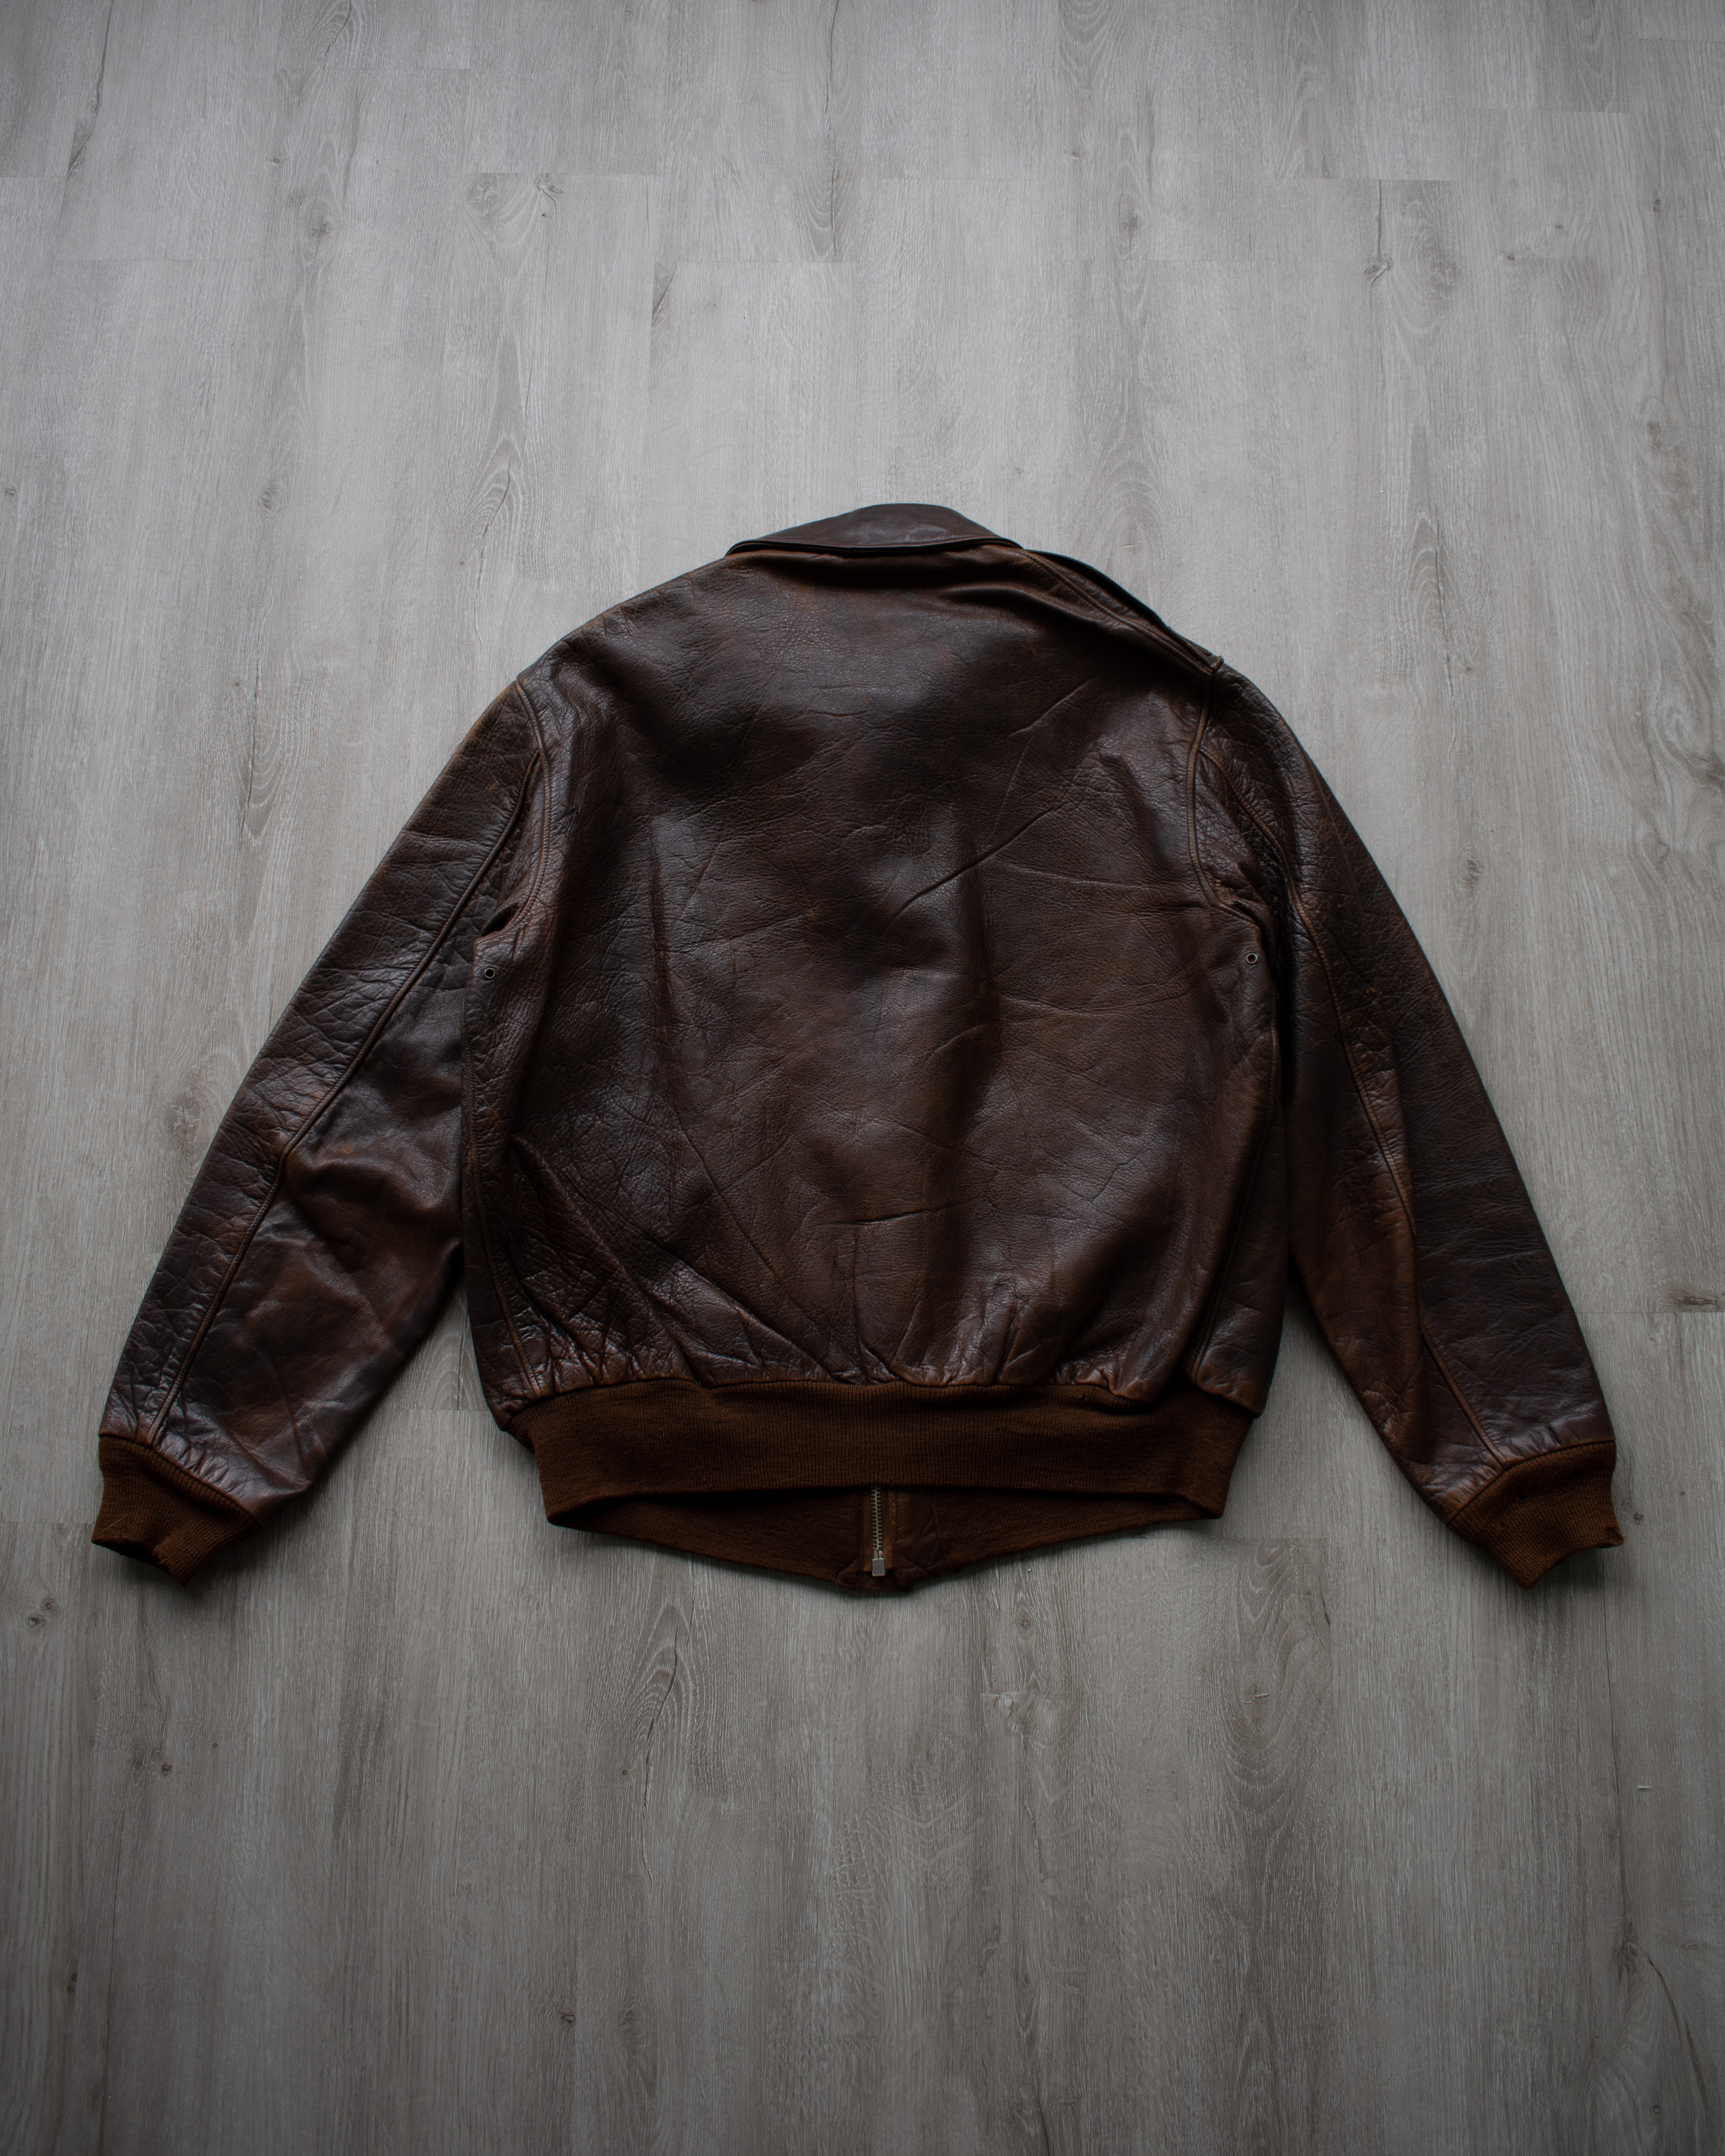 ORIGINAL WWII ROUGH WEAR CLOTHING 16159 TYPE A-2 (81ST BS) | Vintage ...